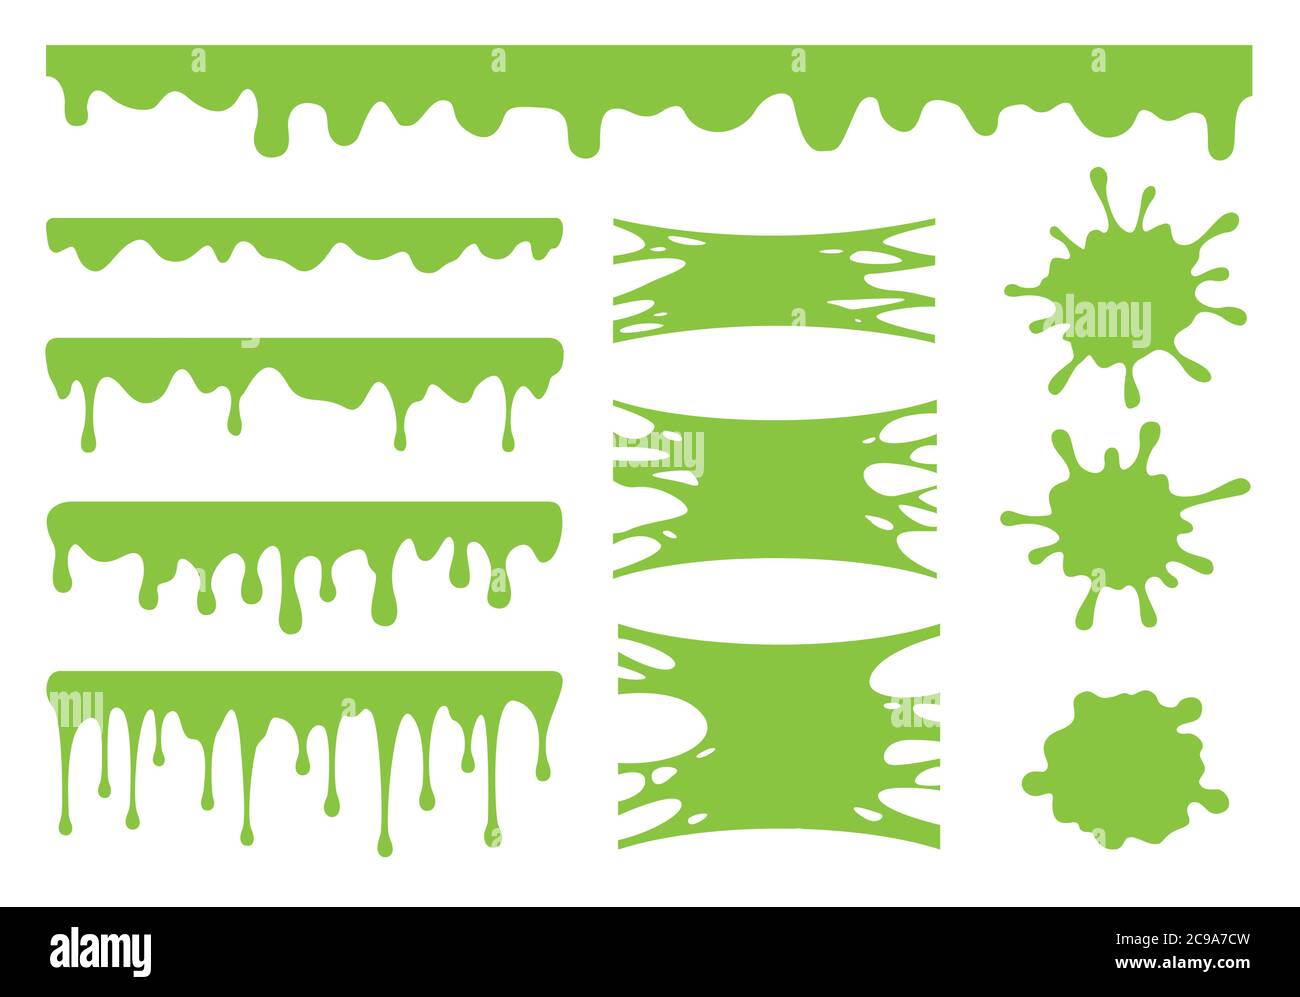 Slime vector set. Green dirt splat, goo dripping splodges of slime. Collection of blots, splashes and smudges isolated on white background. Stock Vector